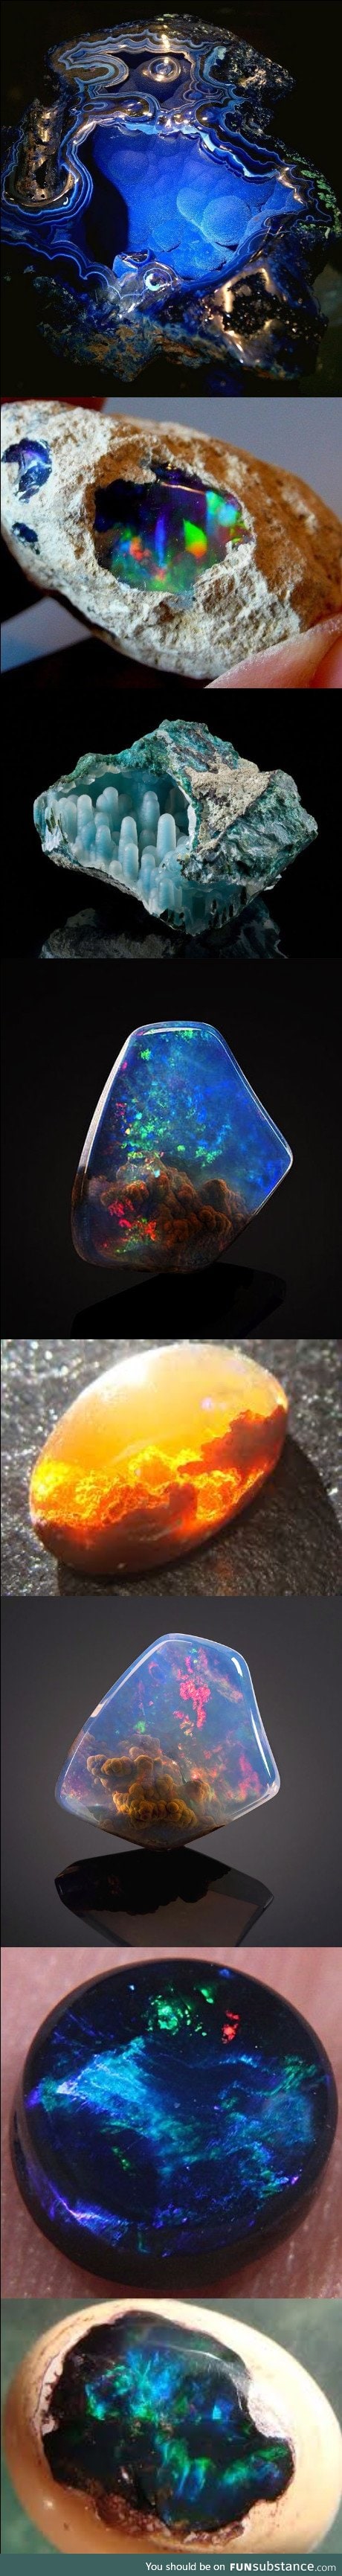 Rocks that look like they contain other worlds